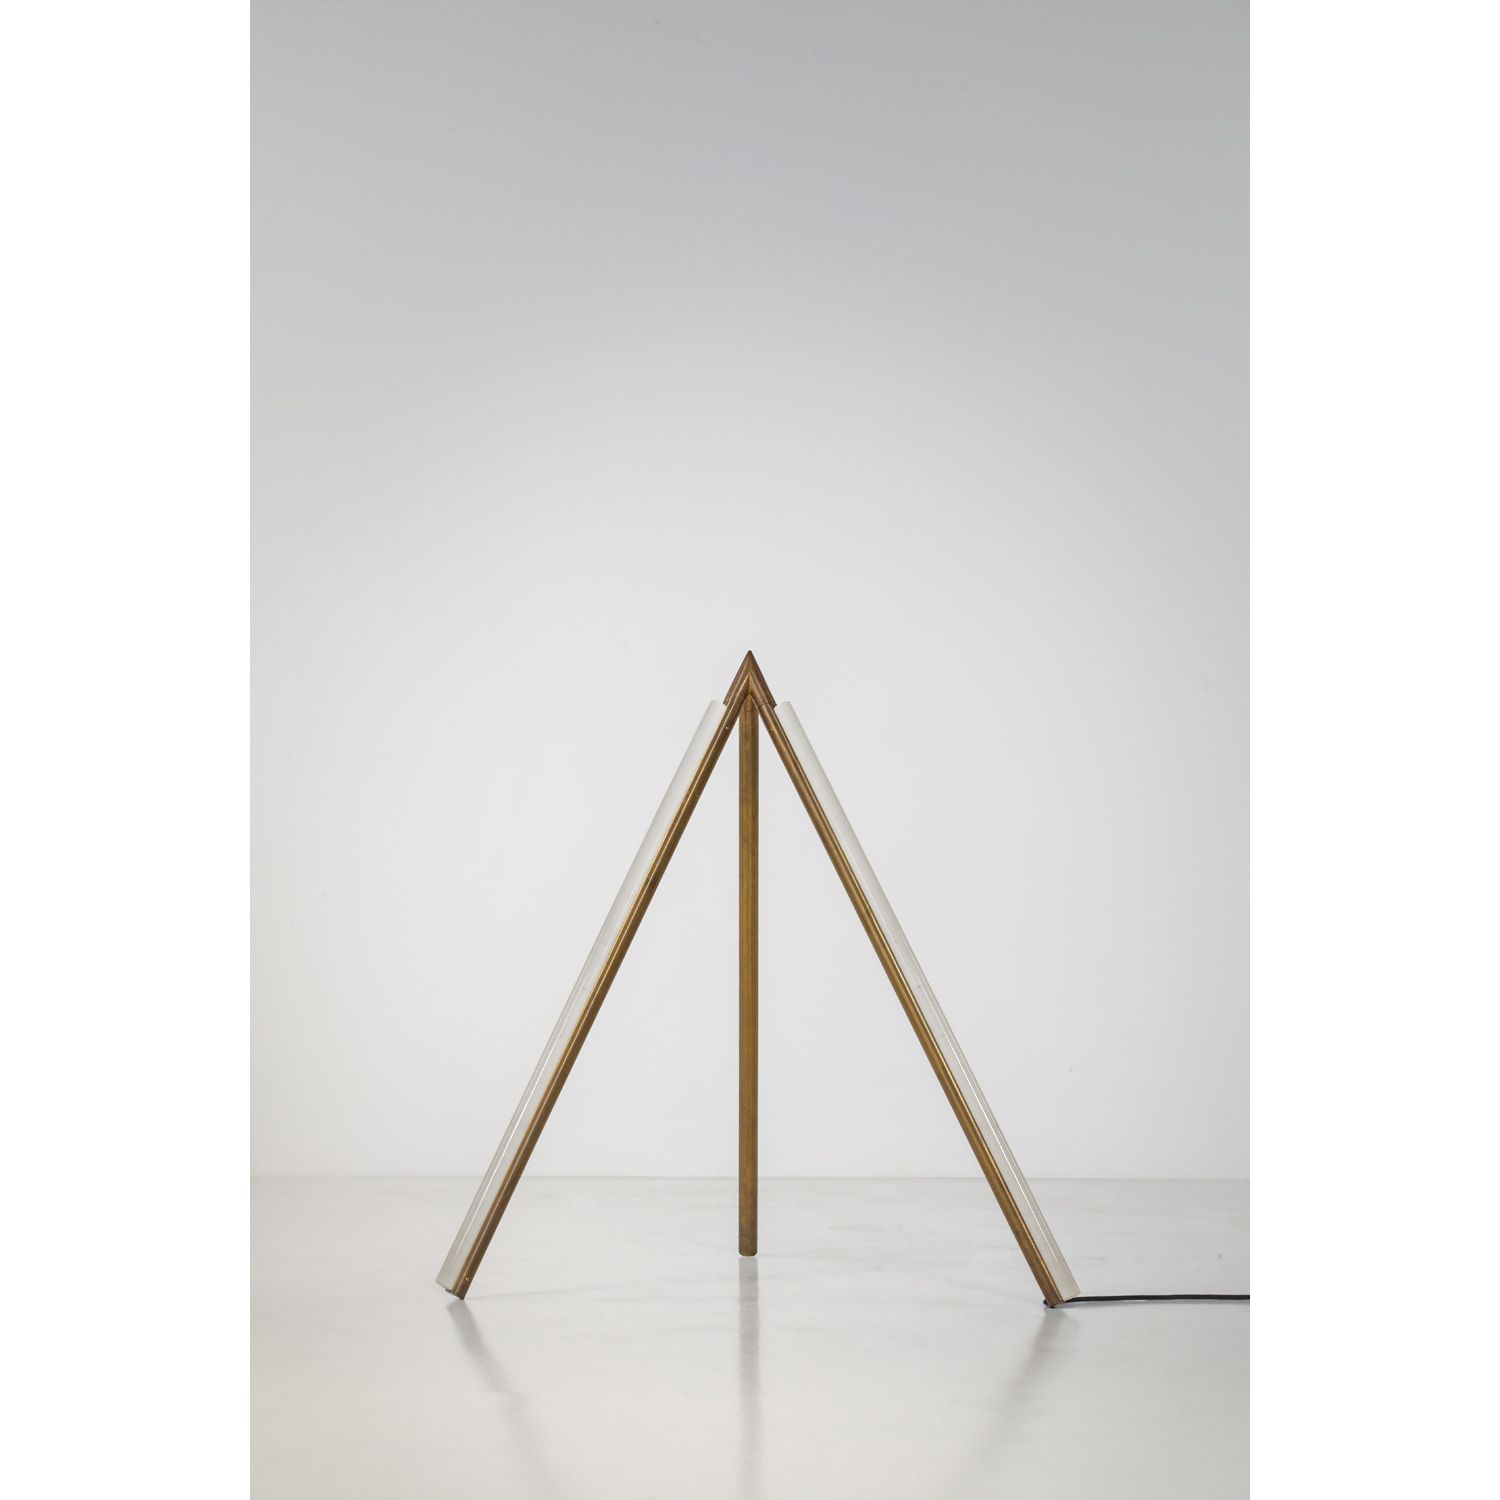 Null Michael Anastassiades (born 1967)

Lit Lines collection

Floor lamp

Neon a&hellip;